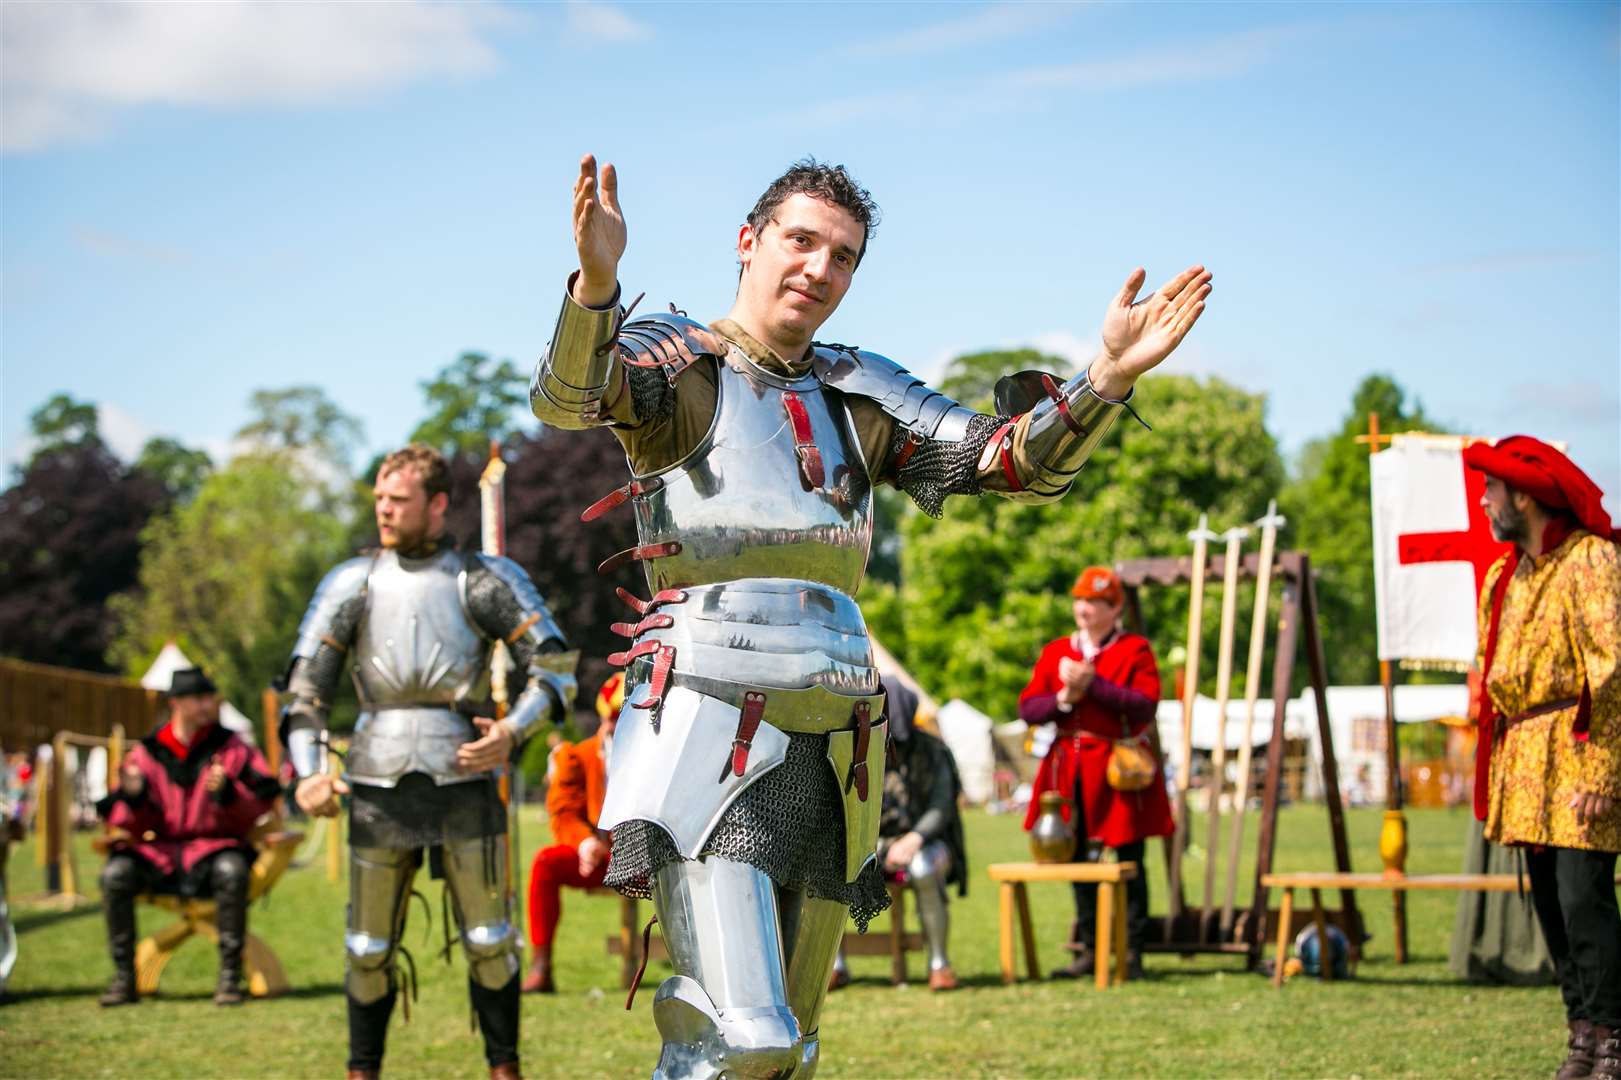 The Grand Medieval Joust at Leeds Castle last year included knight's foot combat in the main arena Picture: www.matthewwalkerphotography.com